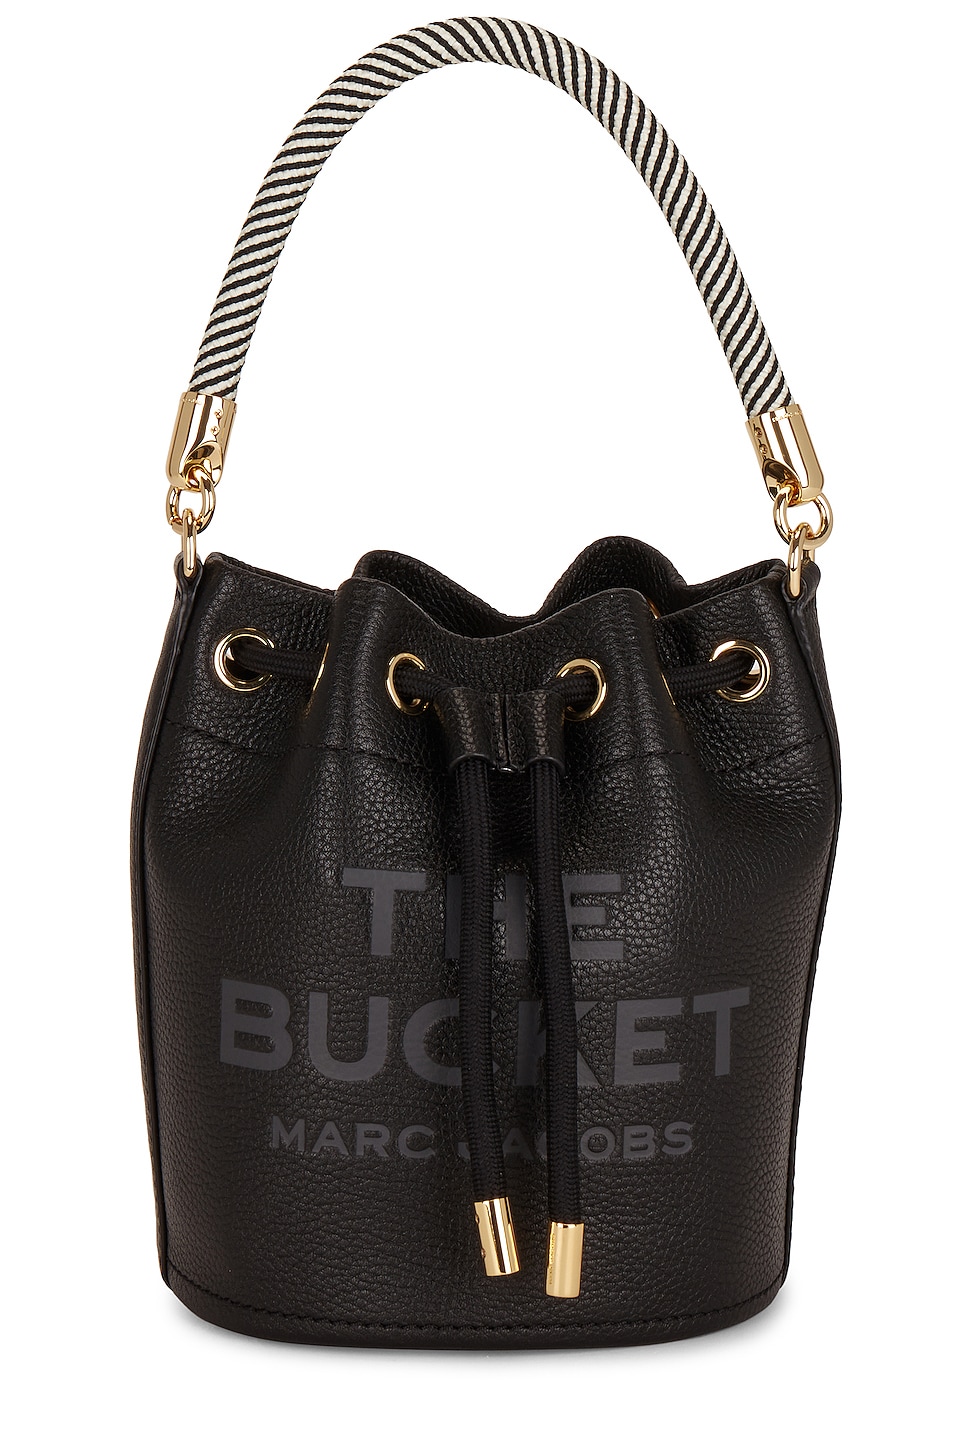 The Marc Jacobs Bucket Bag: Our New Obsession —